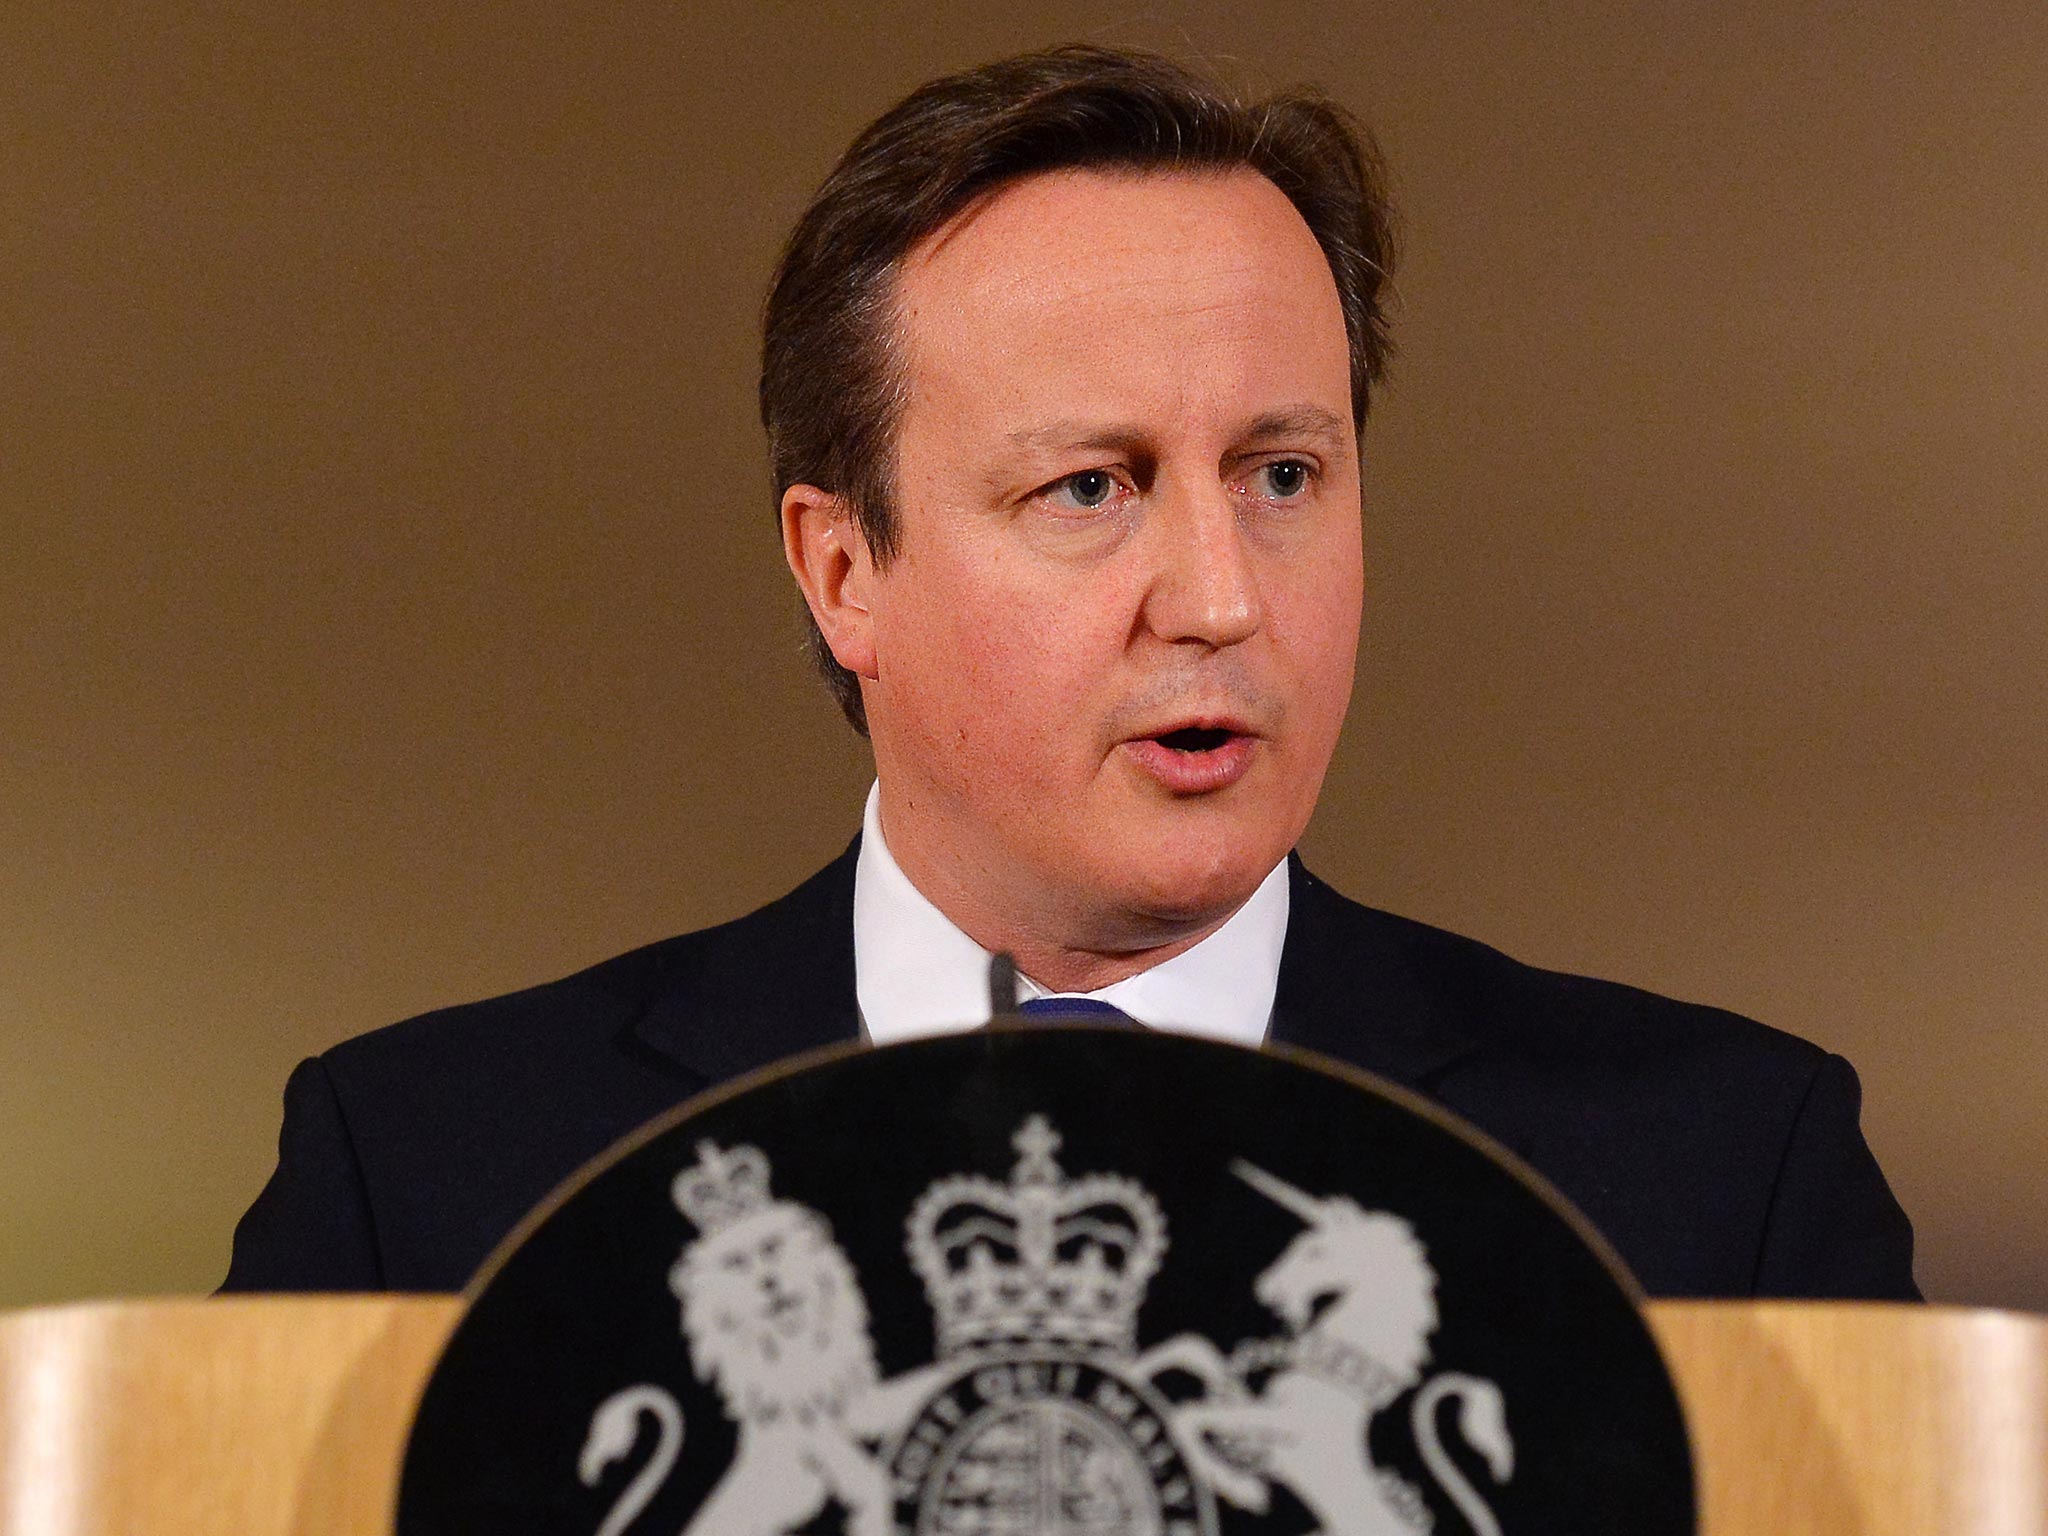 David Cameron promised to cut net migration to 'tens of thousands' by 2015